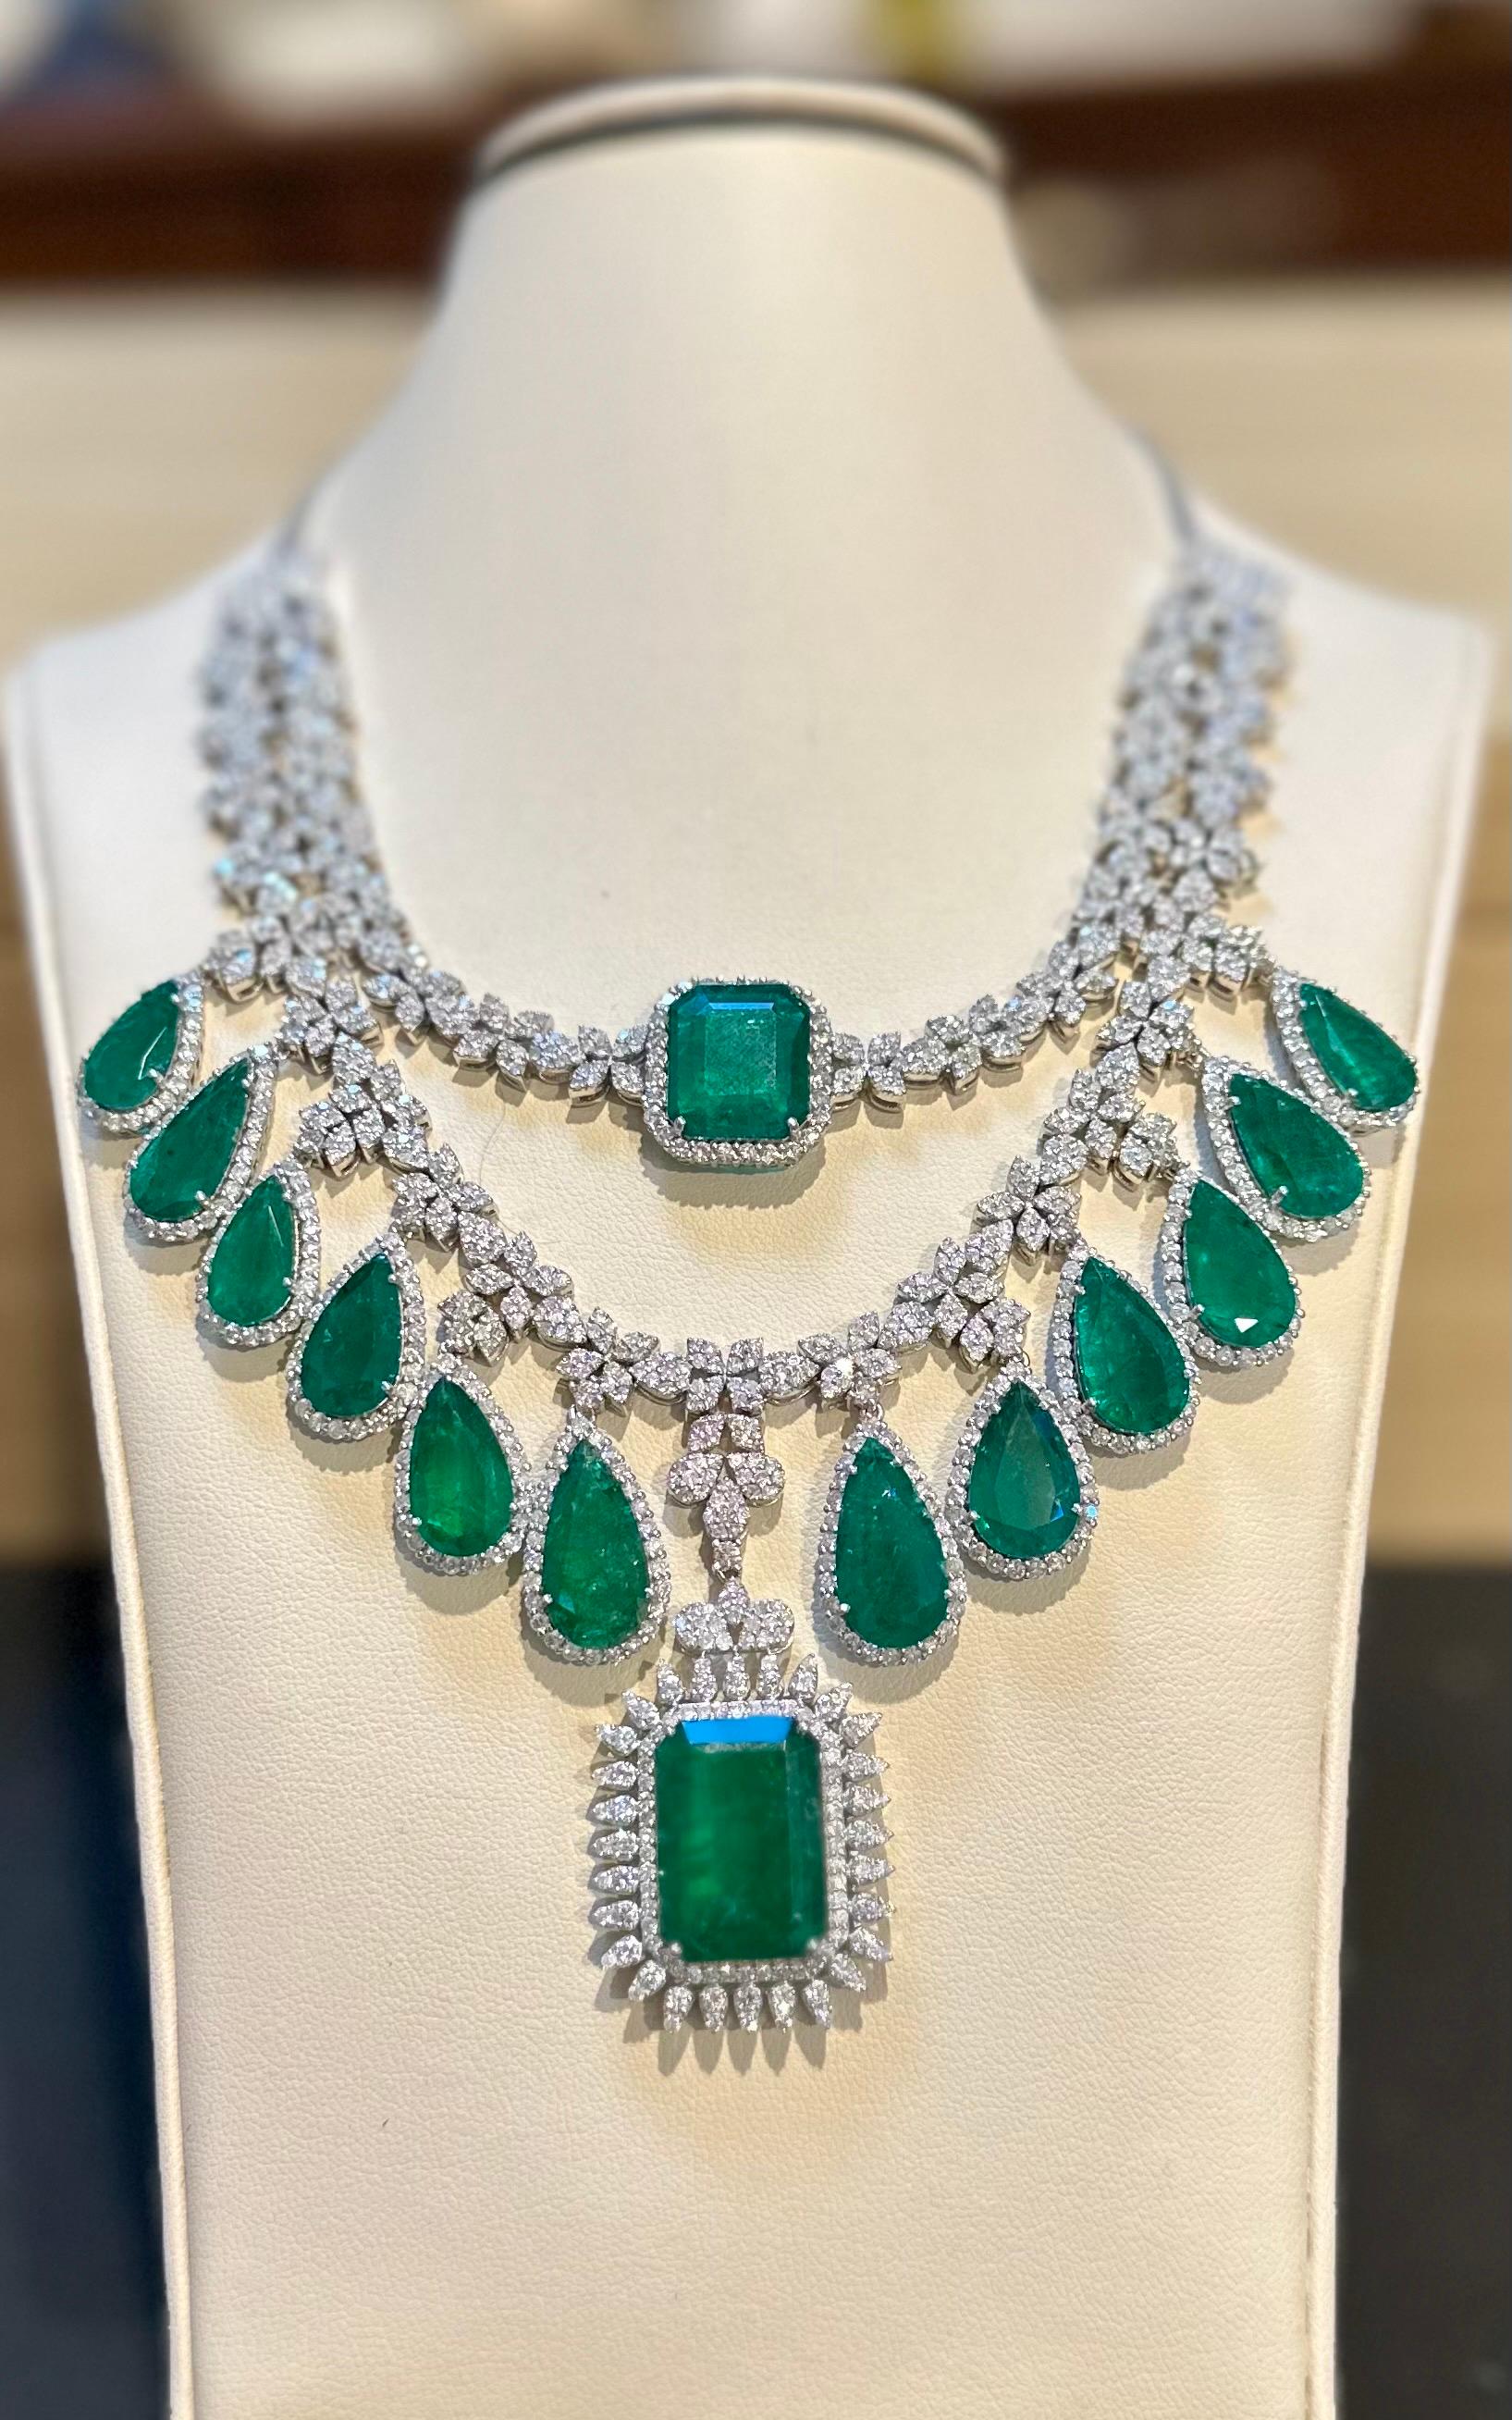 80 Ct Large solitaire Zambian pear shape and Emerald cut  Emerald & 25Ct Diamond Fringe Necklace in two layers , 14KWG Bridal 85 gm
Beautiful Bridal Necklace with two layers. The beauty is that you can detach one of the layer and wear only one layer